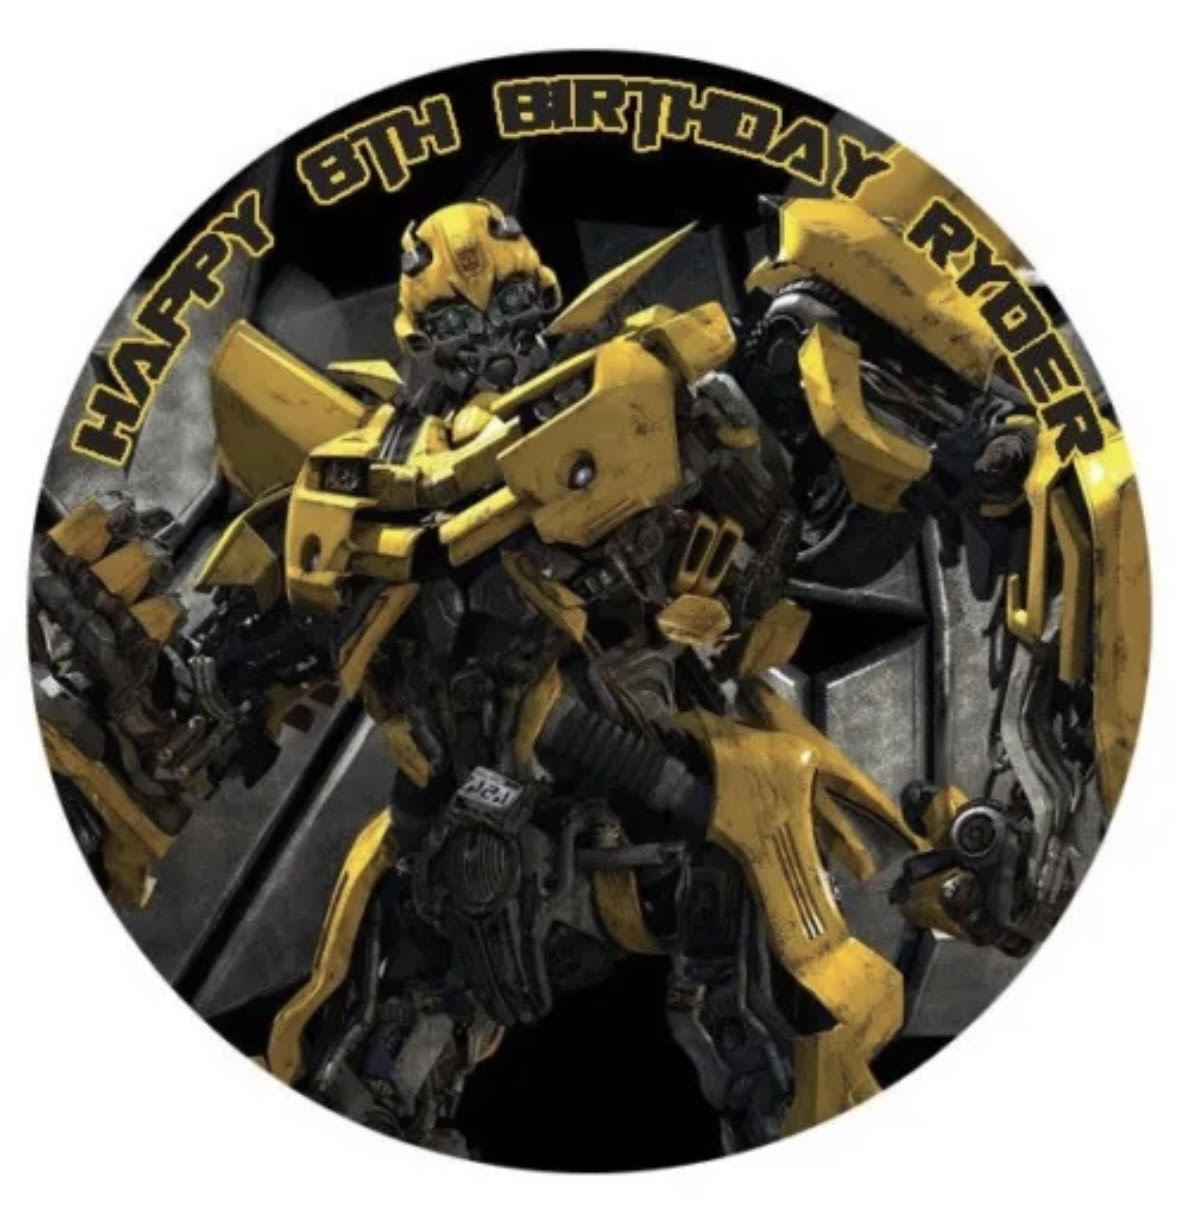 Transformers Bumblebee #1 Round Cake Edible Icing Image Topper 19cm